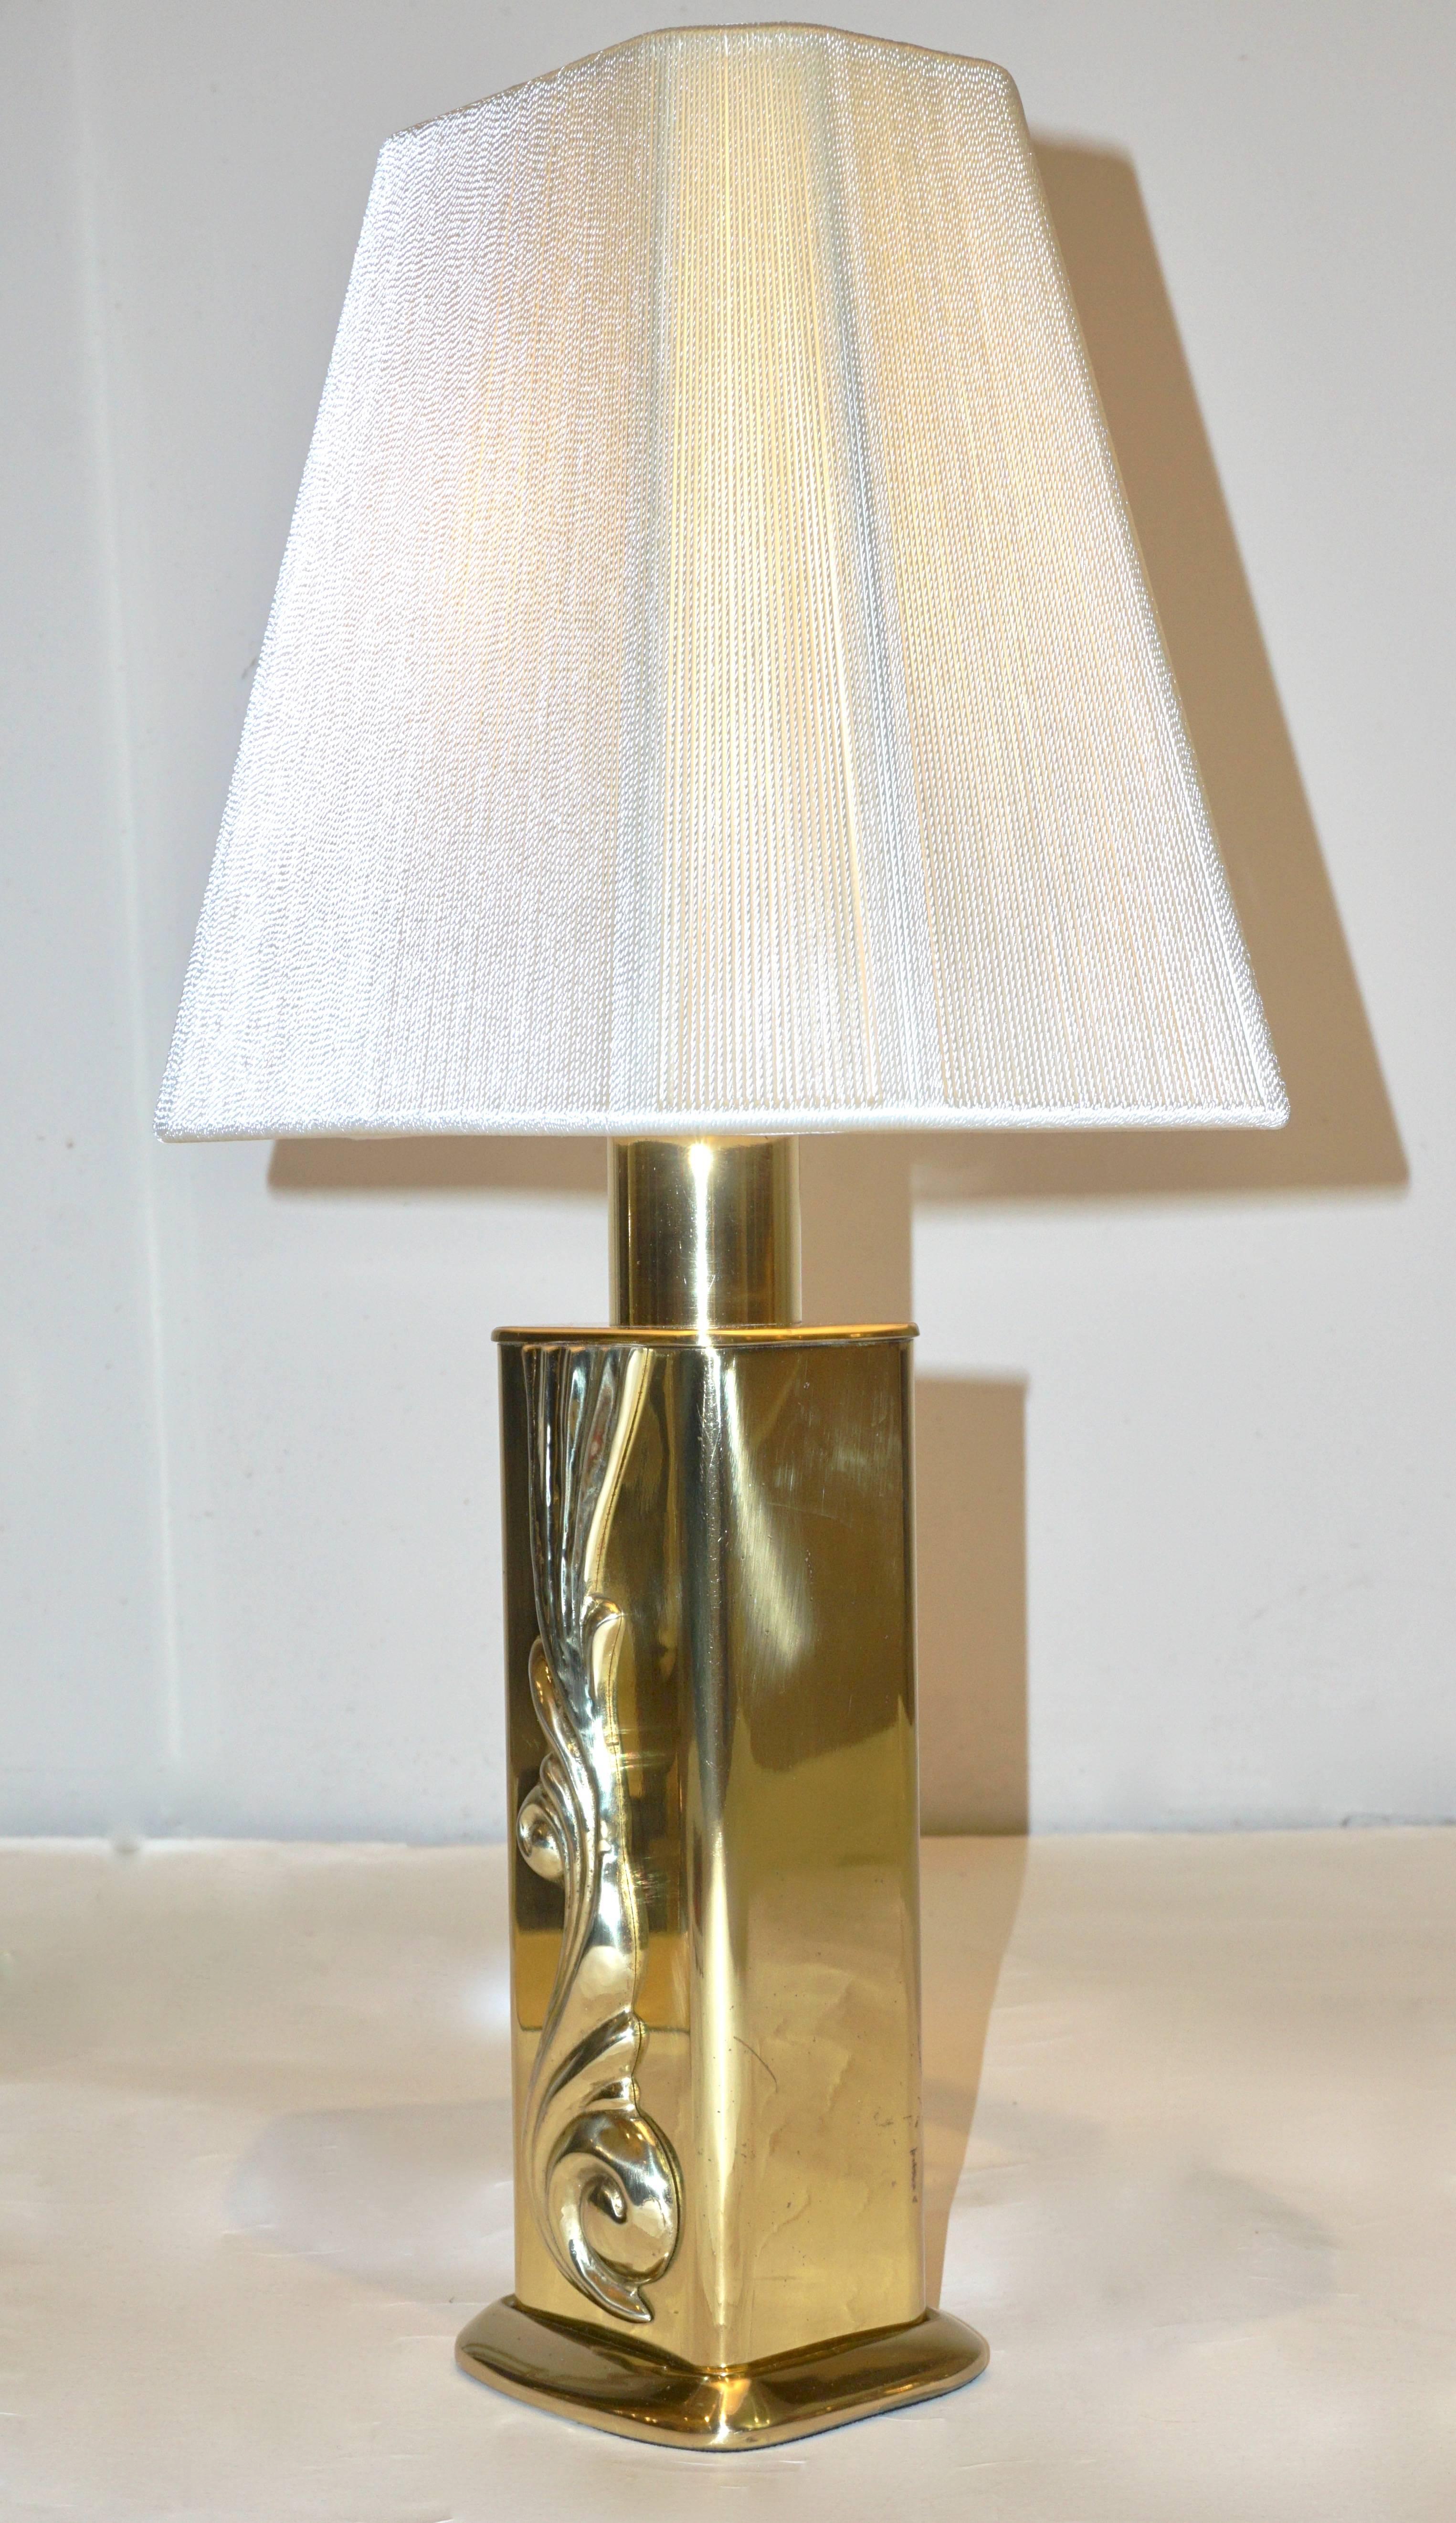 A very chic vintage pair of lamps by Lipparini, an Italian Company founded in 1952 near Bologna by 3 brothers specialized in brass working and today in bedroom furniture. Their vintage lamps are rare on the market. Exquisite high quality execution